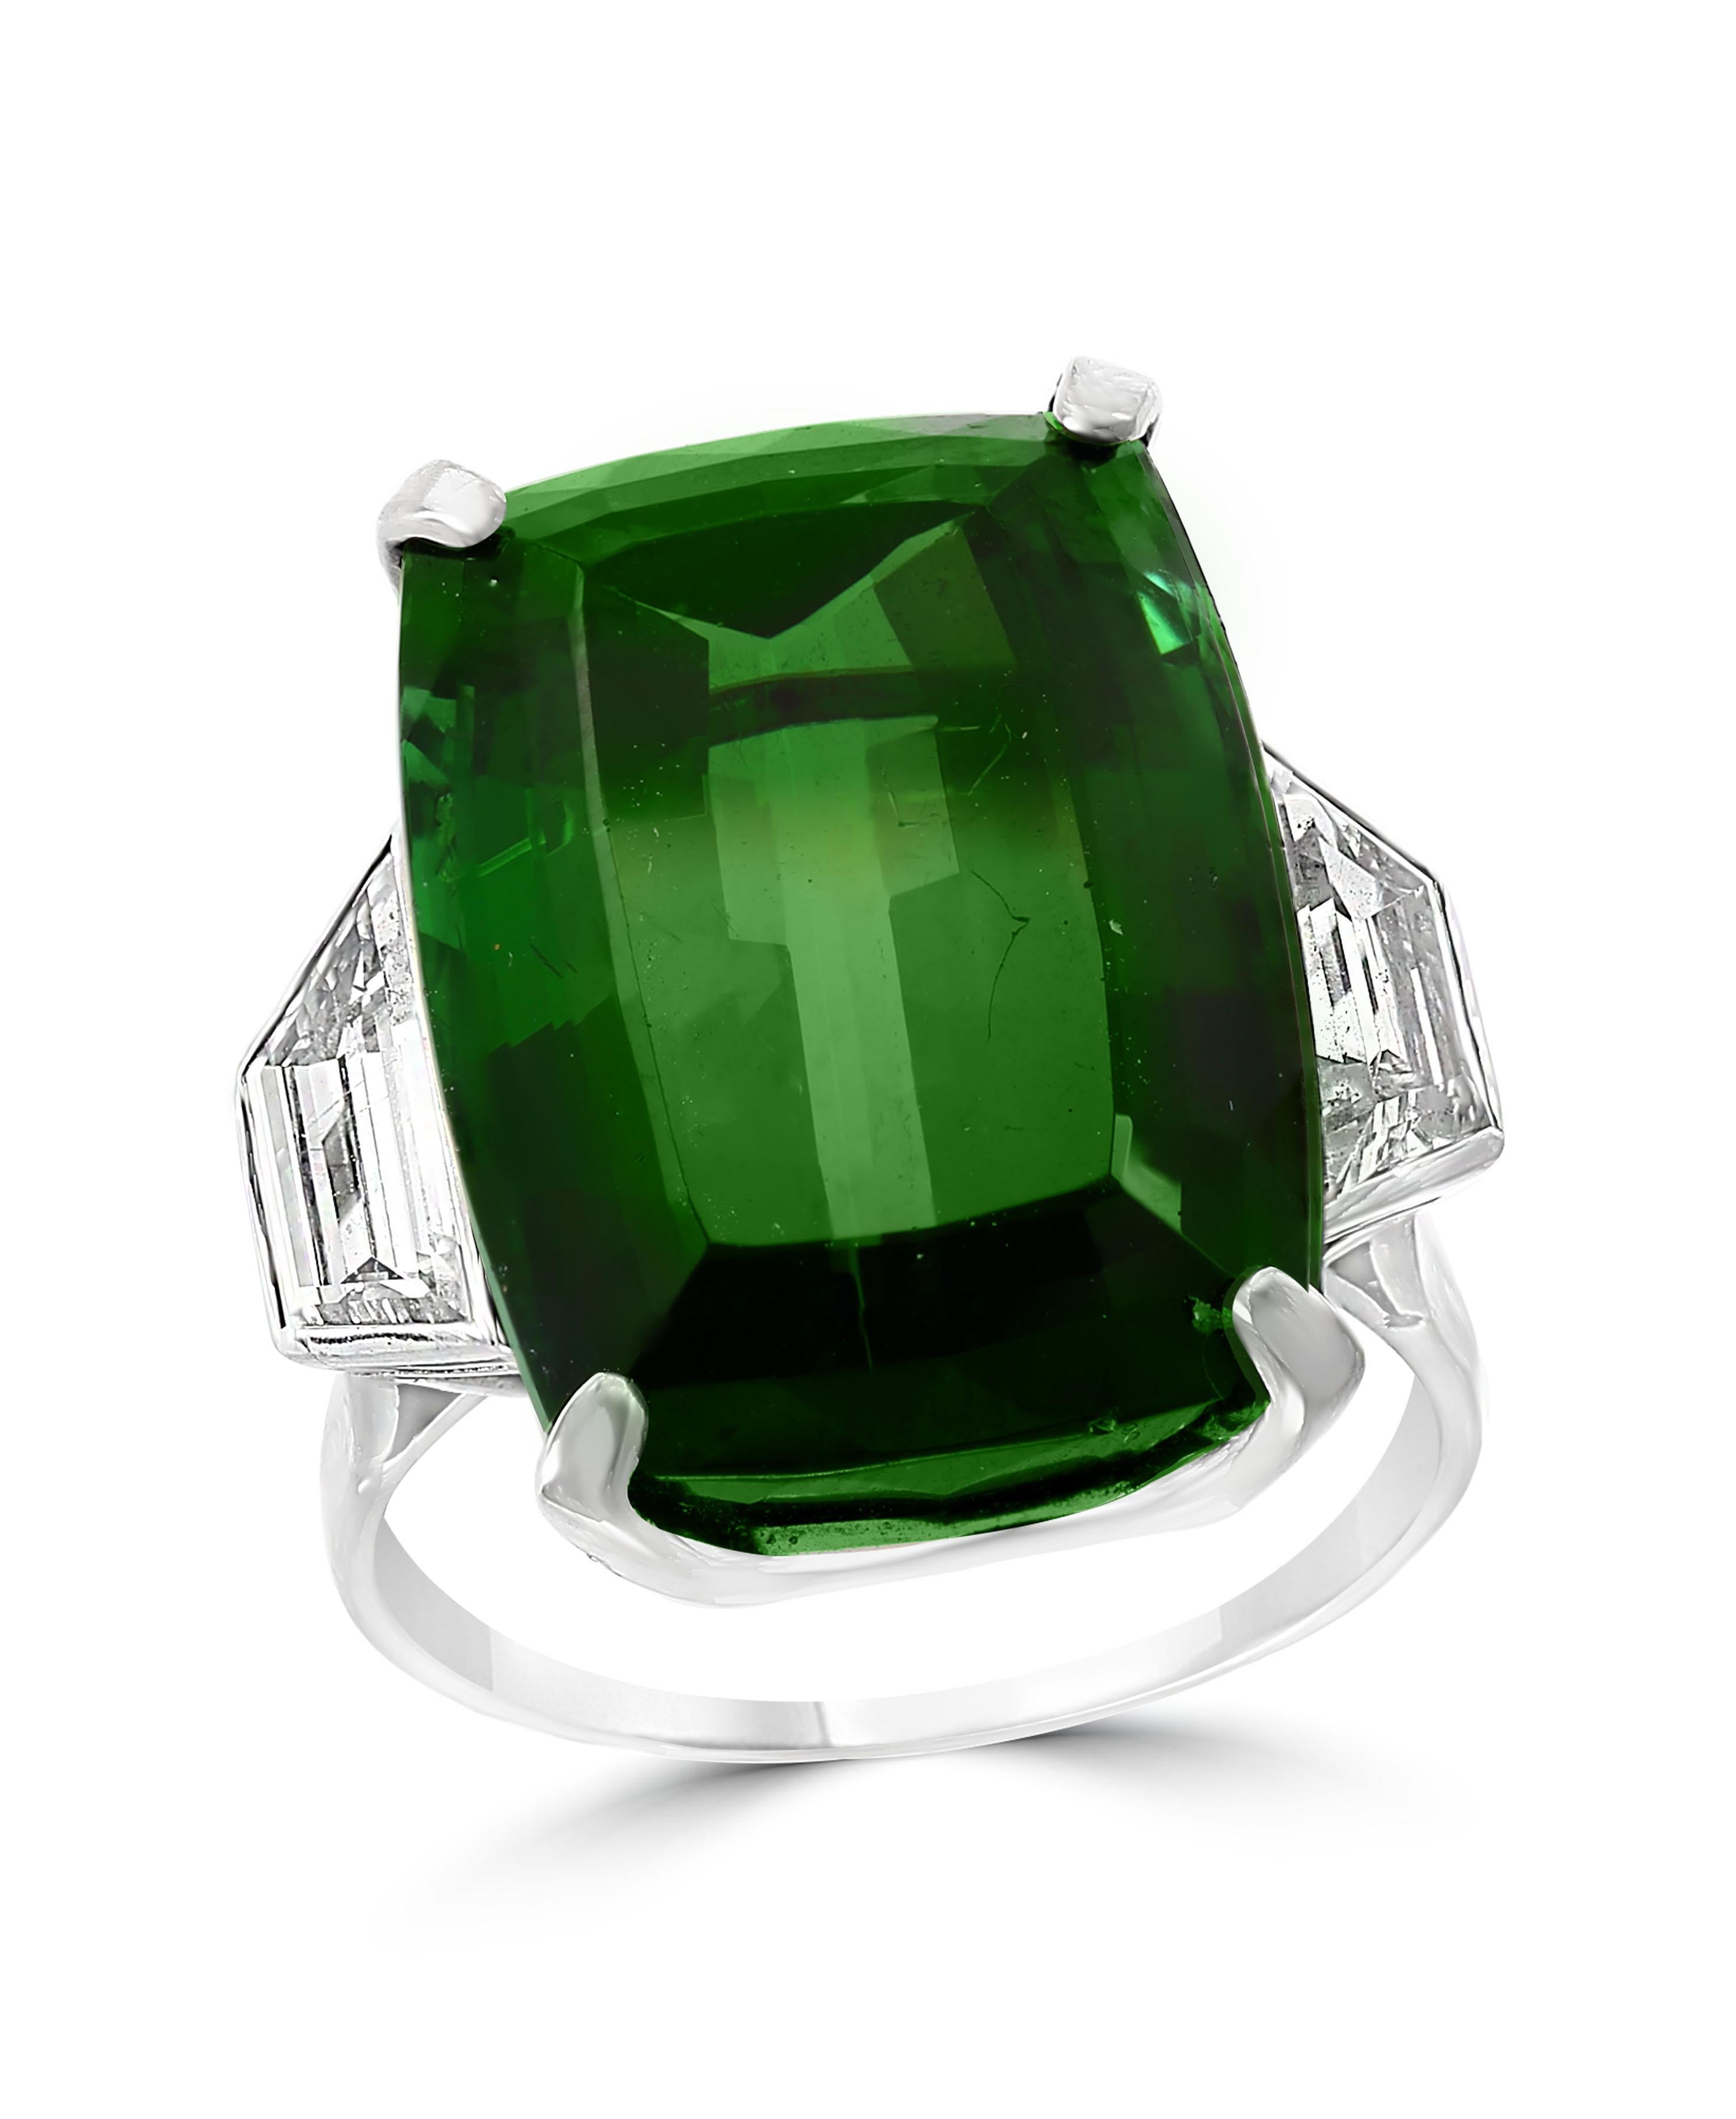 29+ Carat Green Tourmaline and  1.98 Ct solitaire Diamond Cocktail Ring  Platinum Estate
A classic, Cocktail ring 
Huge 29.26  Carat of very clean no inclusion  Green Tourmaline full of luster and shine  and Diamond ring.
Two diamonds weight is 1.98